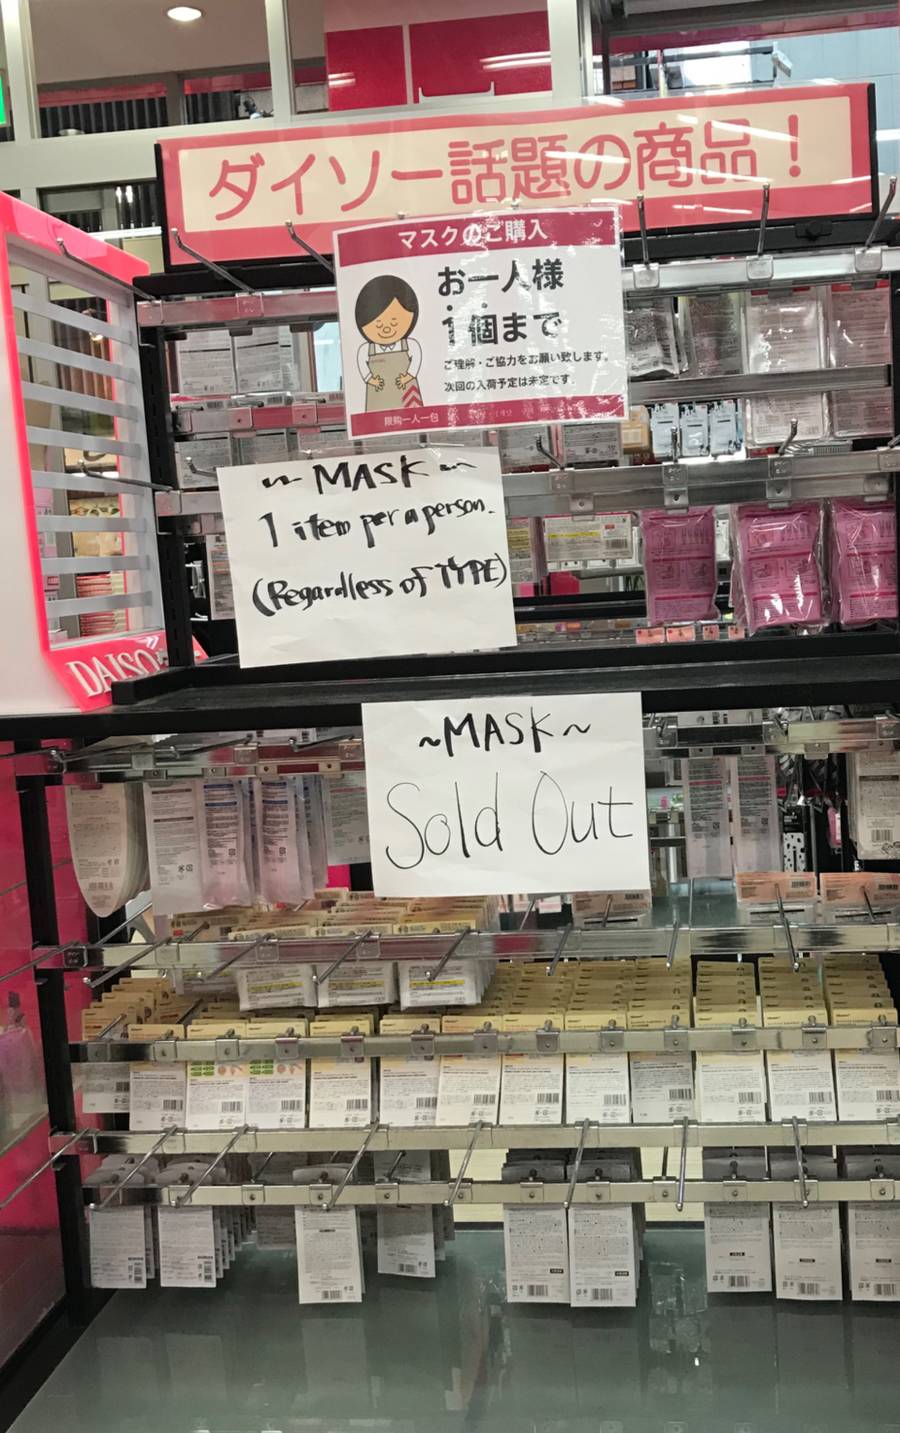 Masks sold out